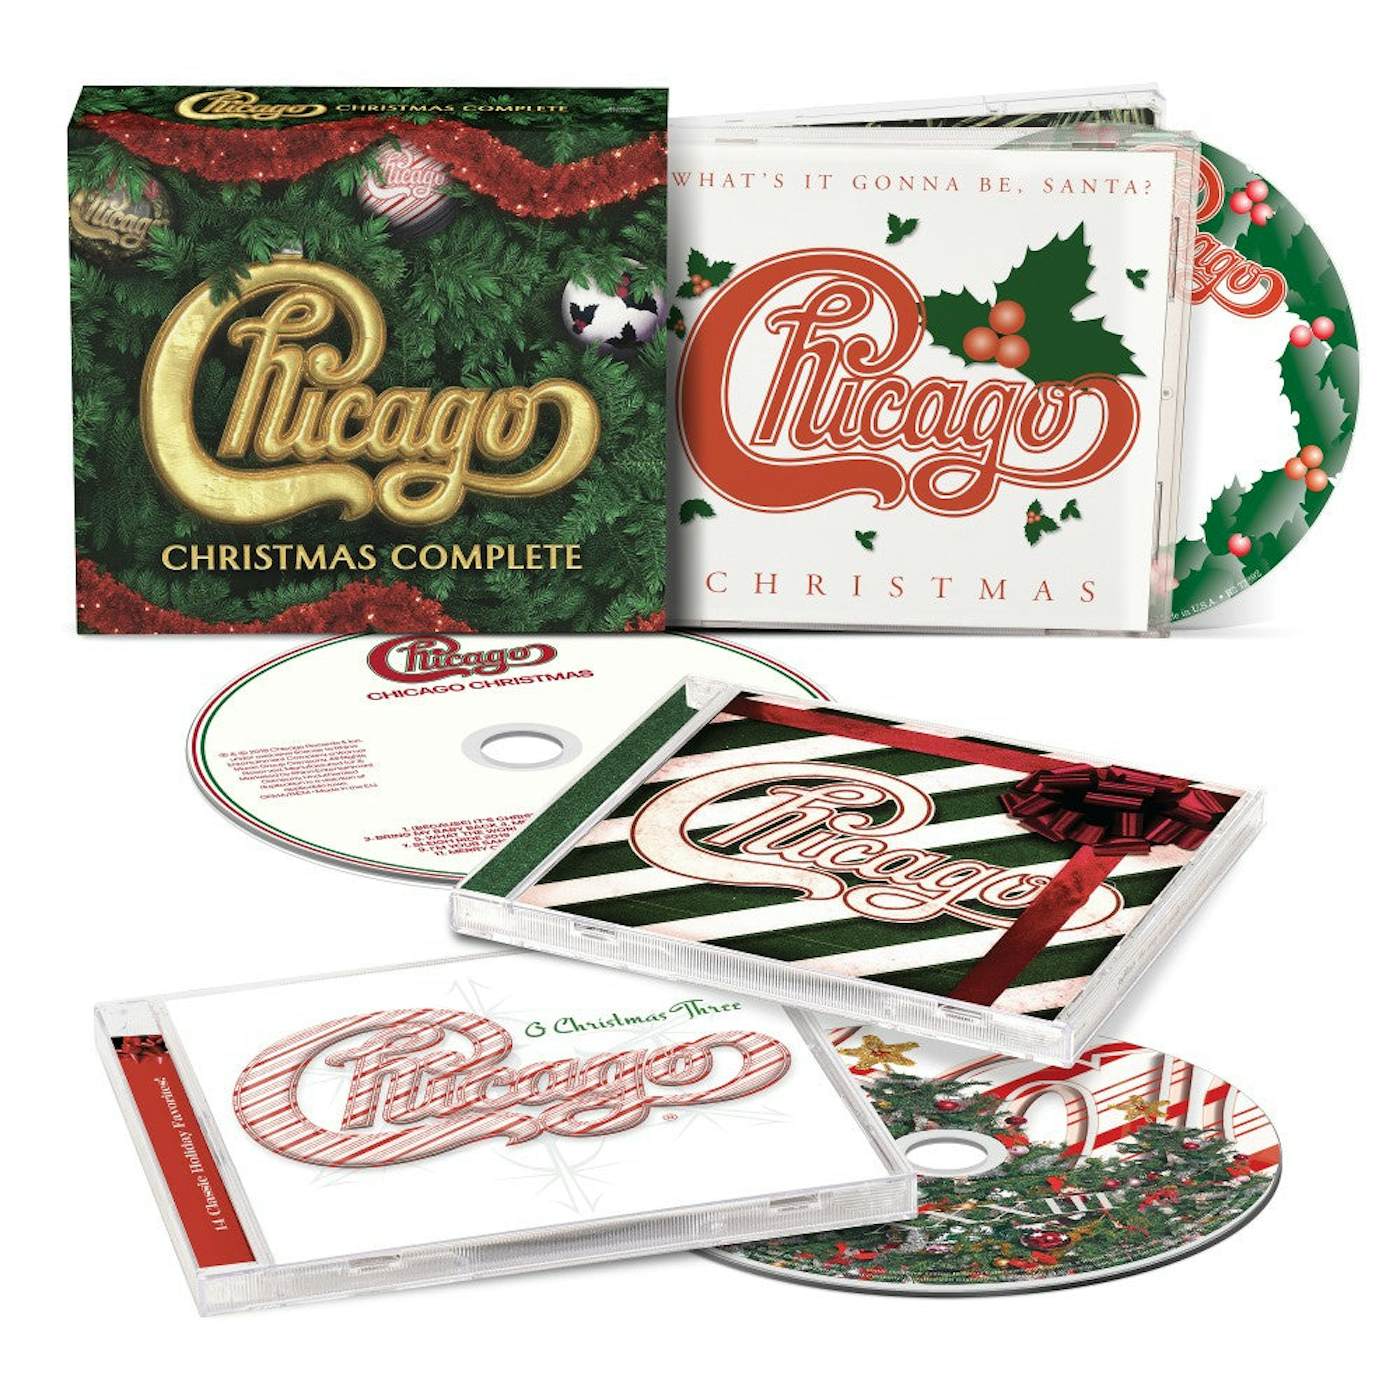 Chicago Christmas Complete (3CD)